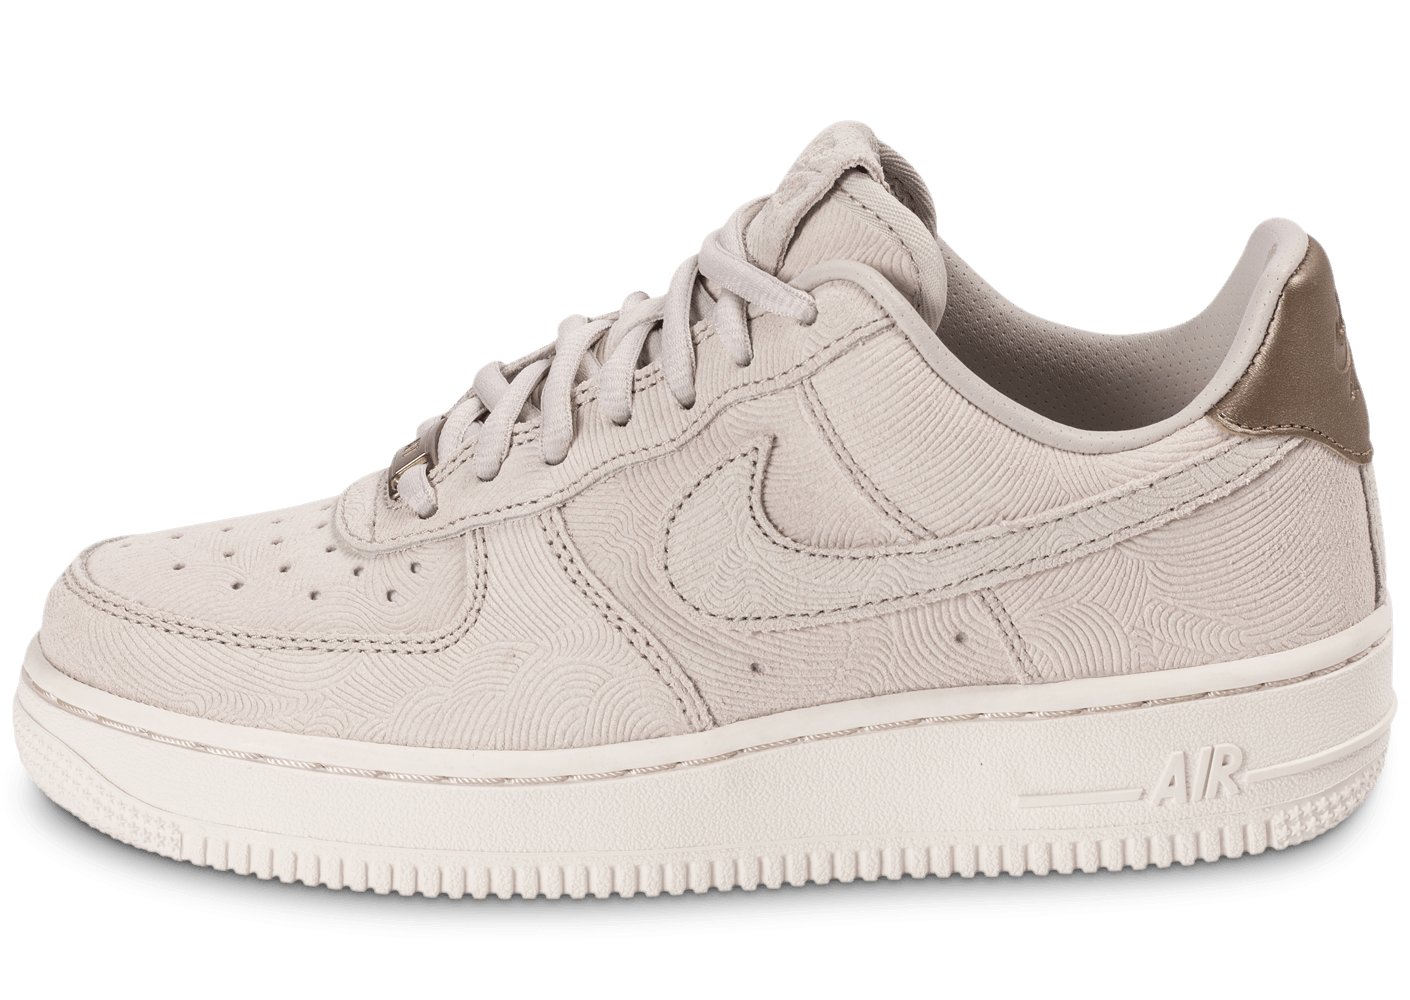 nike femme air force 1 suede, Nike Air Force 1 Premium Suede Gamma grey - Chaussures Femme - Chausport